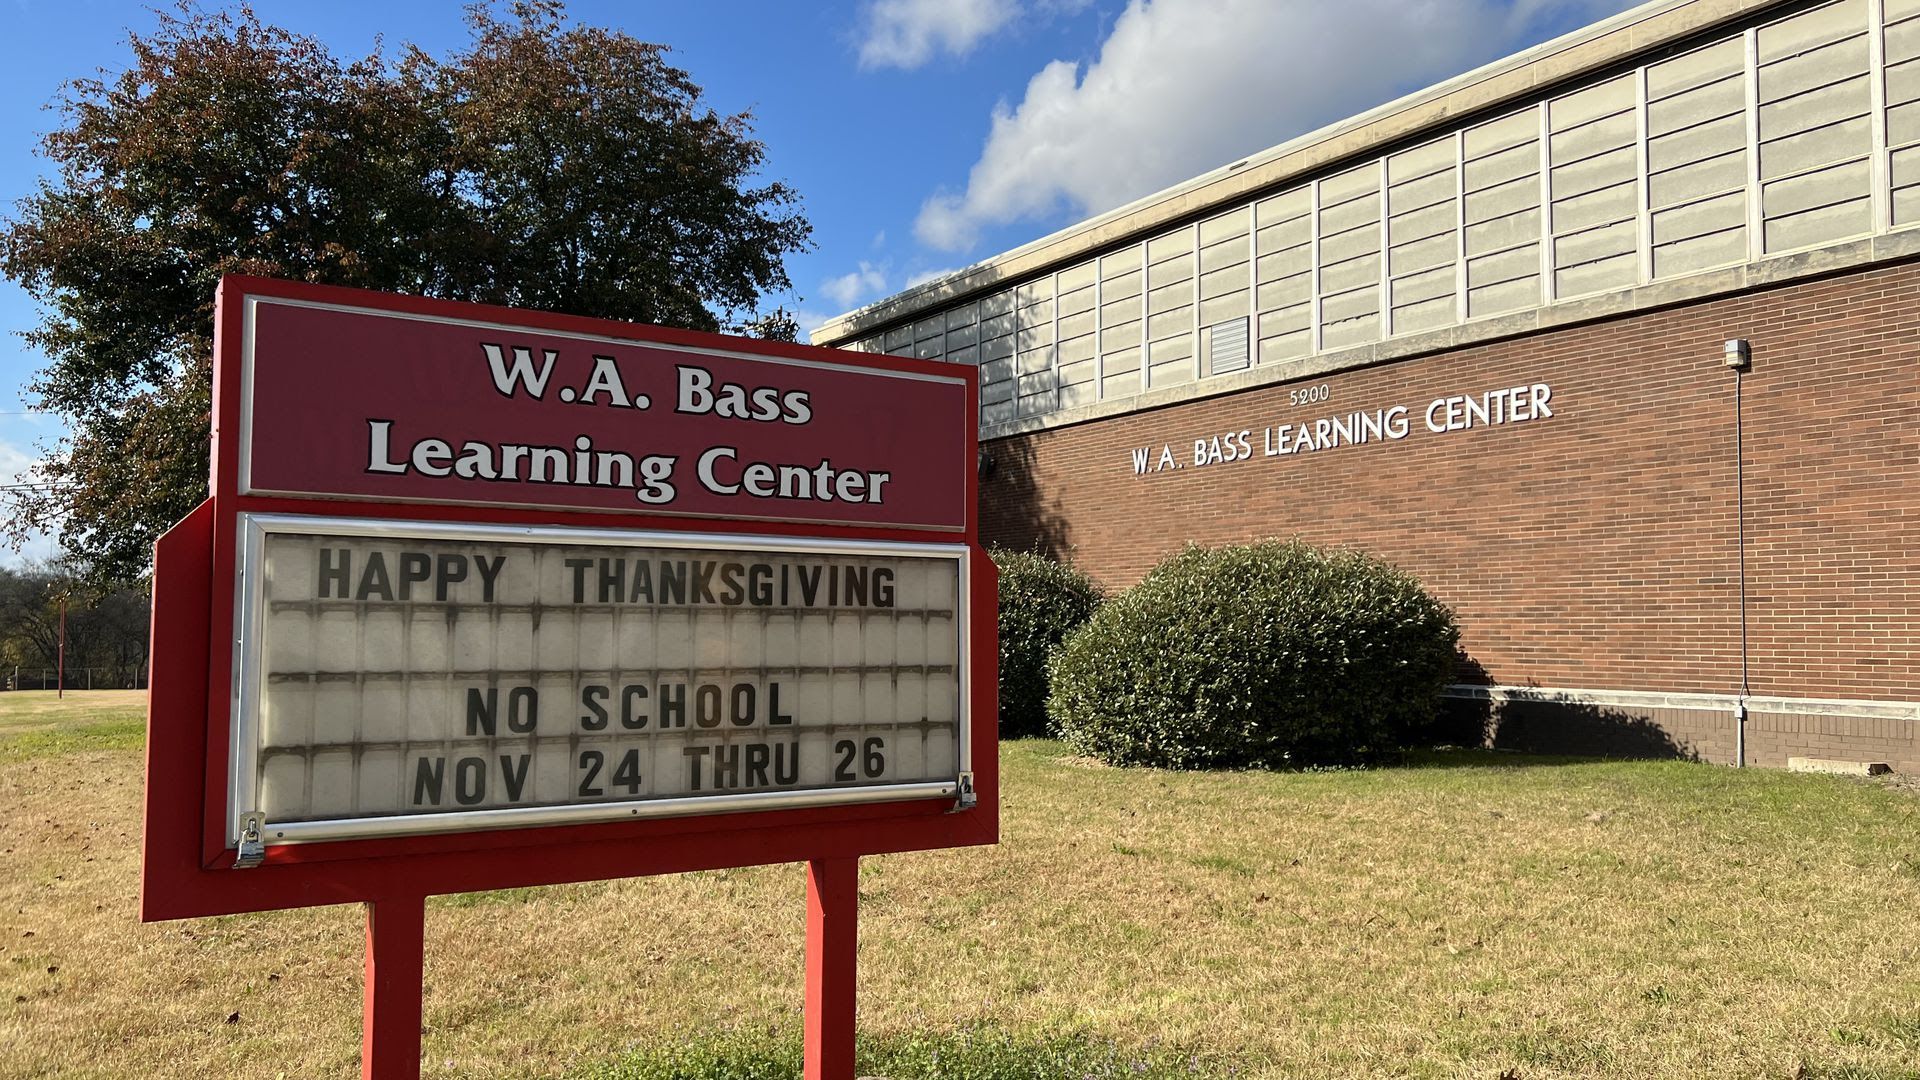 W.A. Bass Learning Center, where Councilmember Mary Carolyn Roberts wants to put a new charter school. 